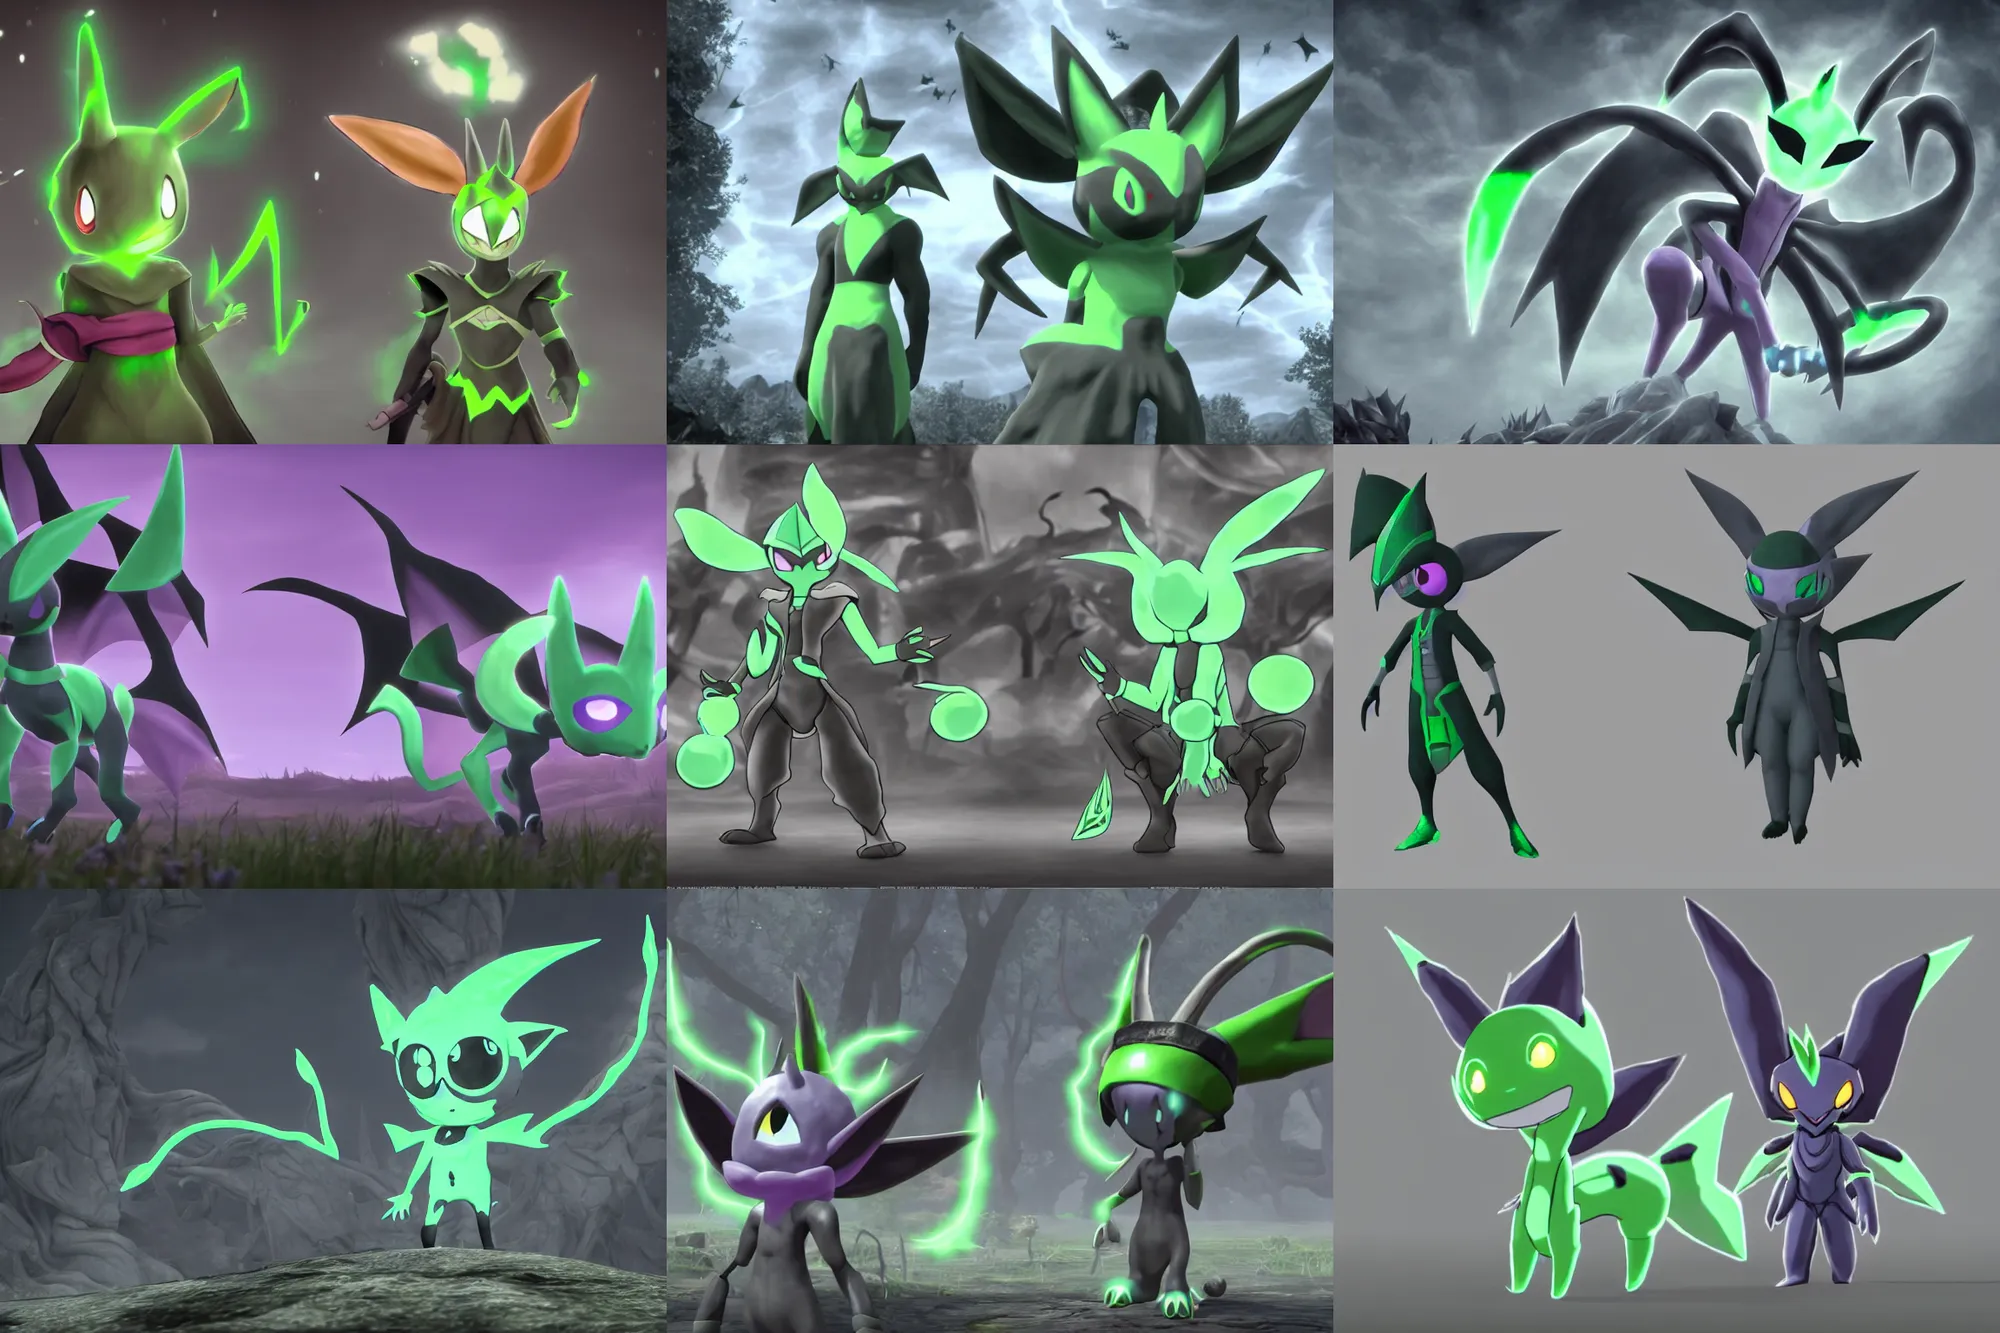 Prompt: grayscale low saturation video game elden clay celebi : espeons reprisal star valley resident evil unreal engine mismagius oblivion mystery dungeon ultrahd resident eevee wearing bandanna fighting giratina, the old god wearing a witch hat pokemon final ue 4